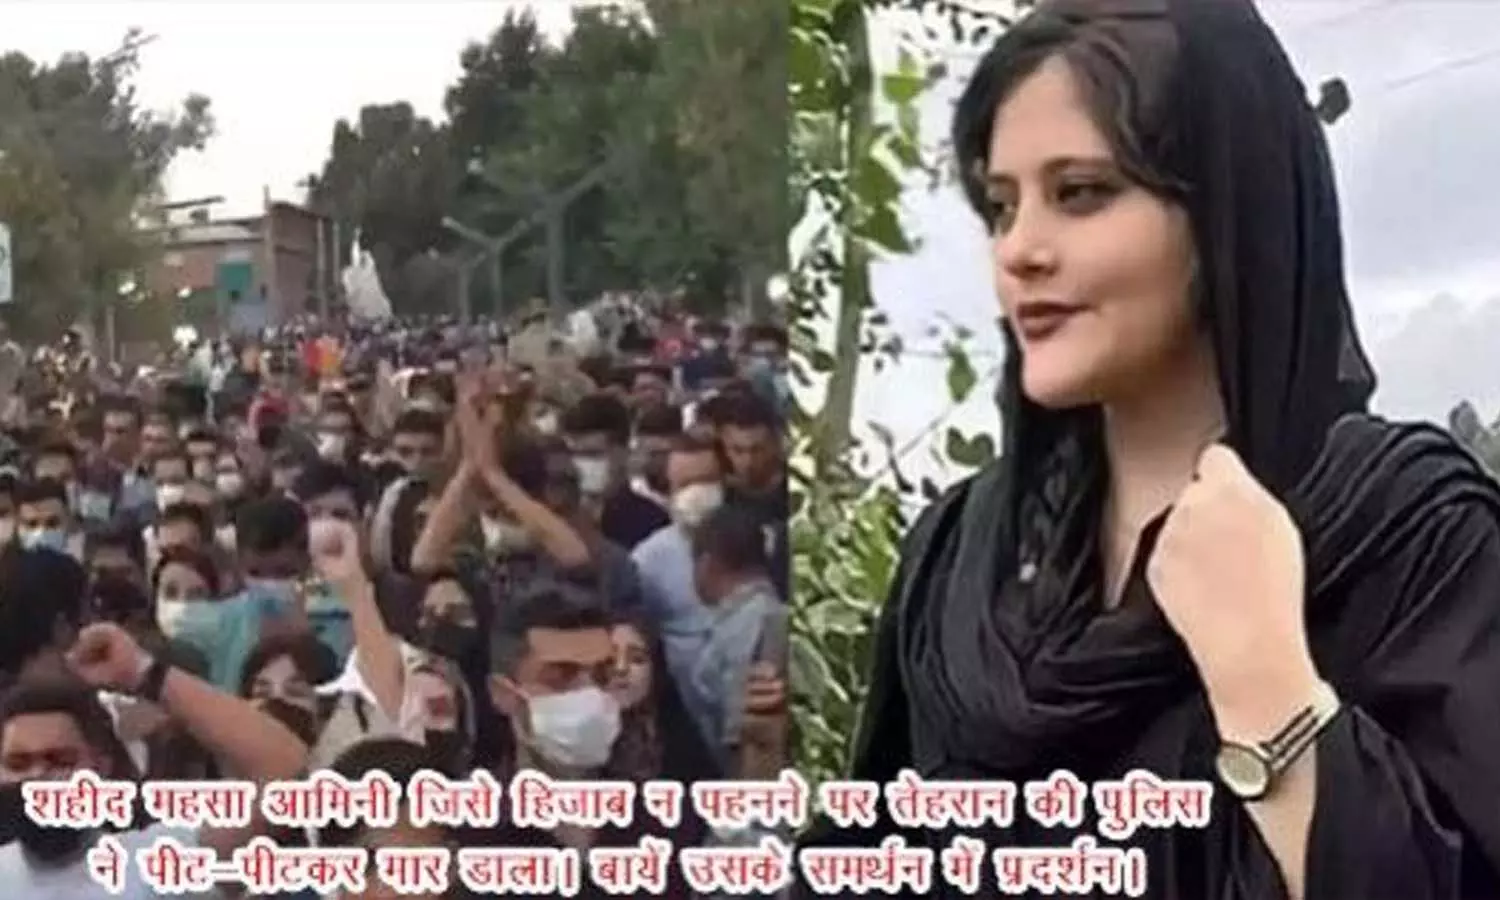 Iranis Kurdish girl Mehsa Amini protested the hijab and was beaten to death by the police